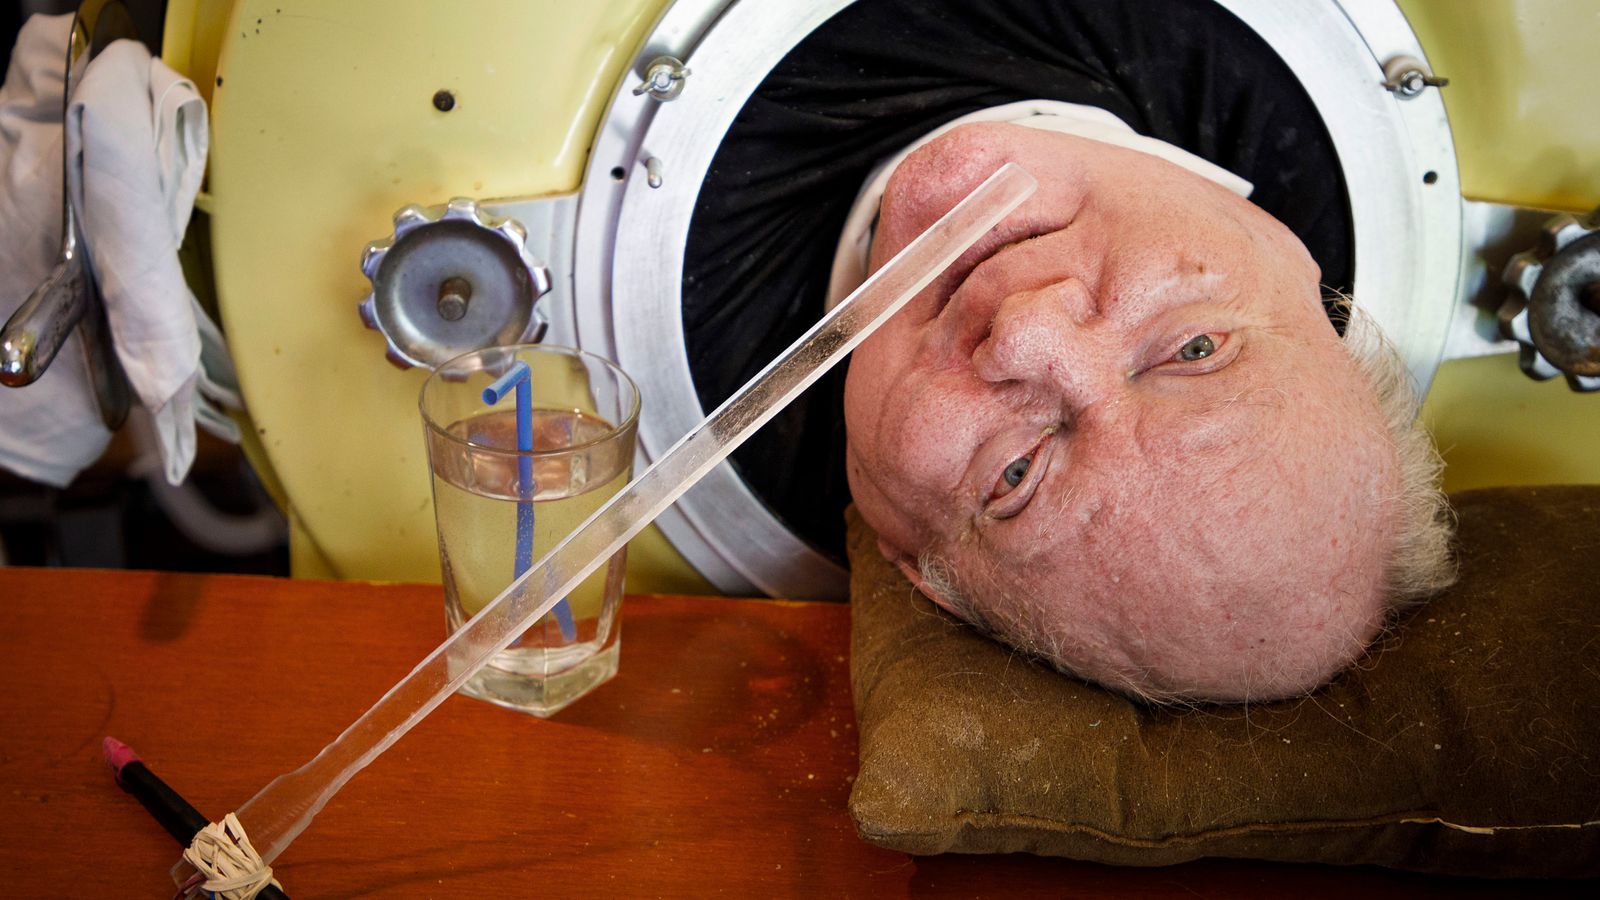 Paul Alexander - 'The Man in the Iron Lung' - dies after 70 years living in tank